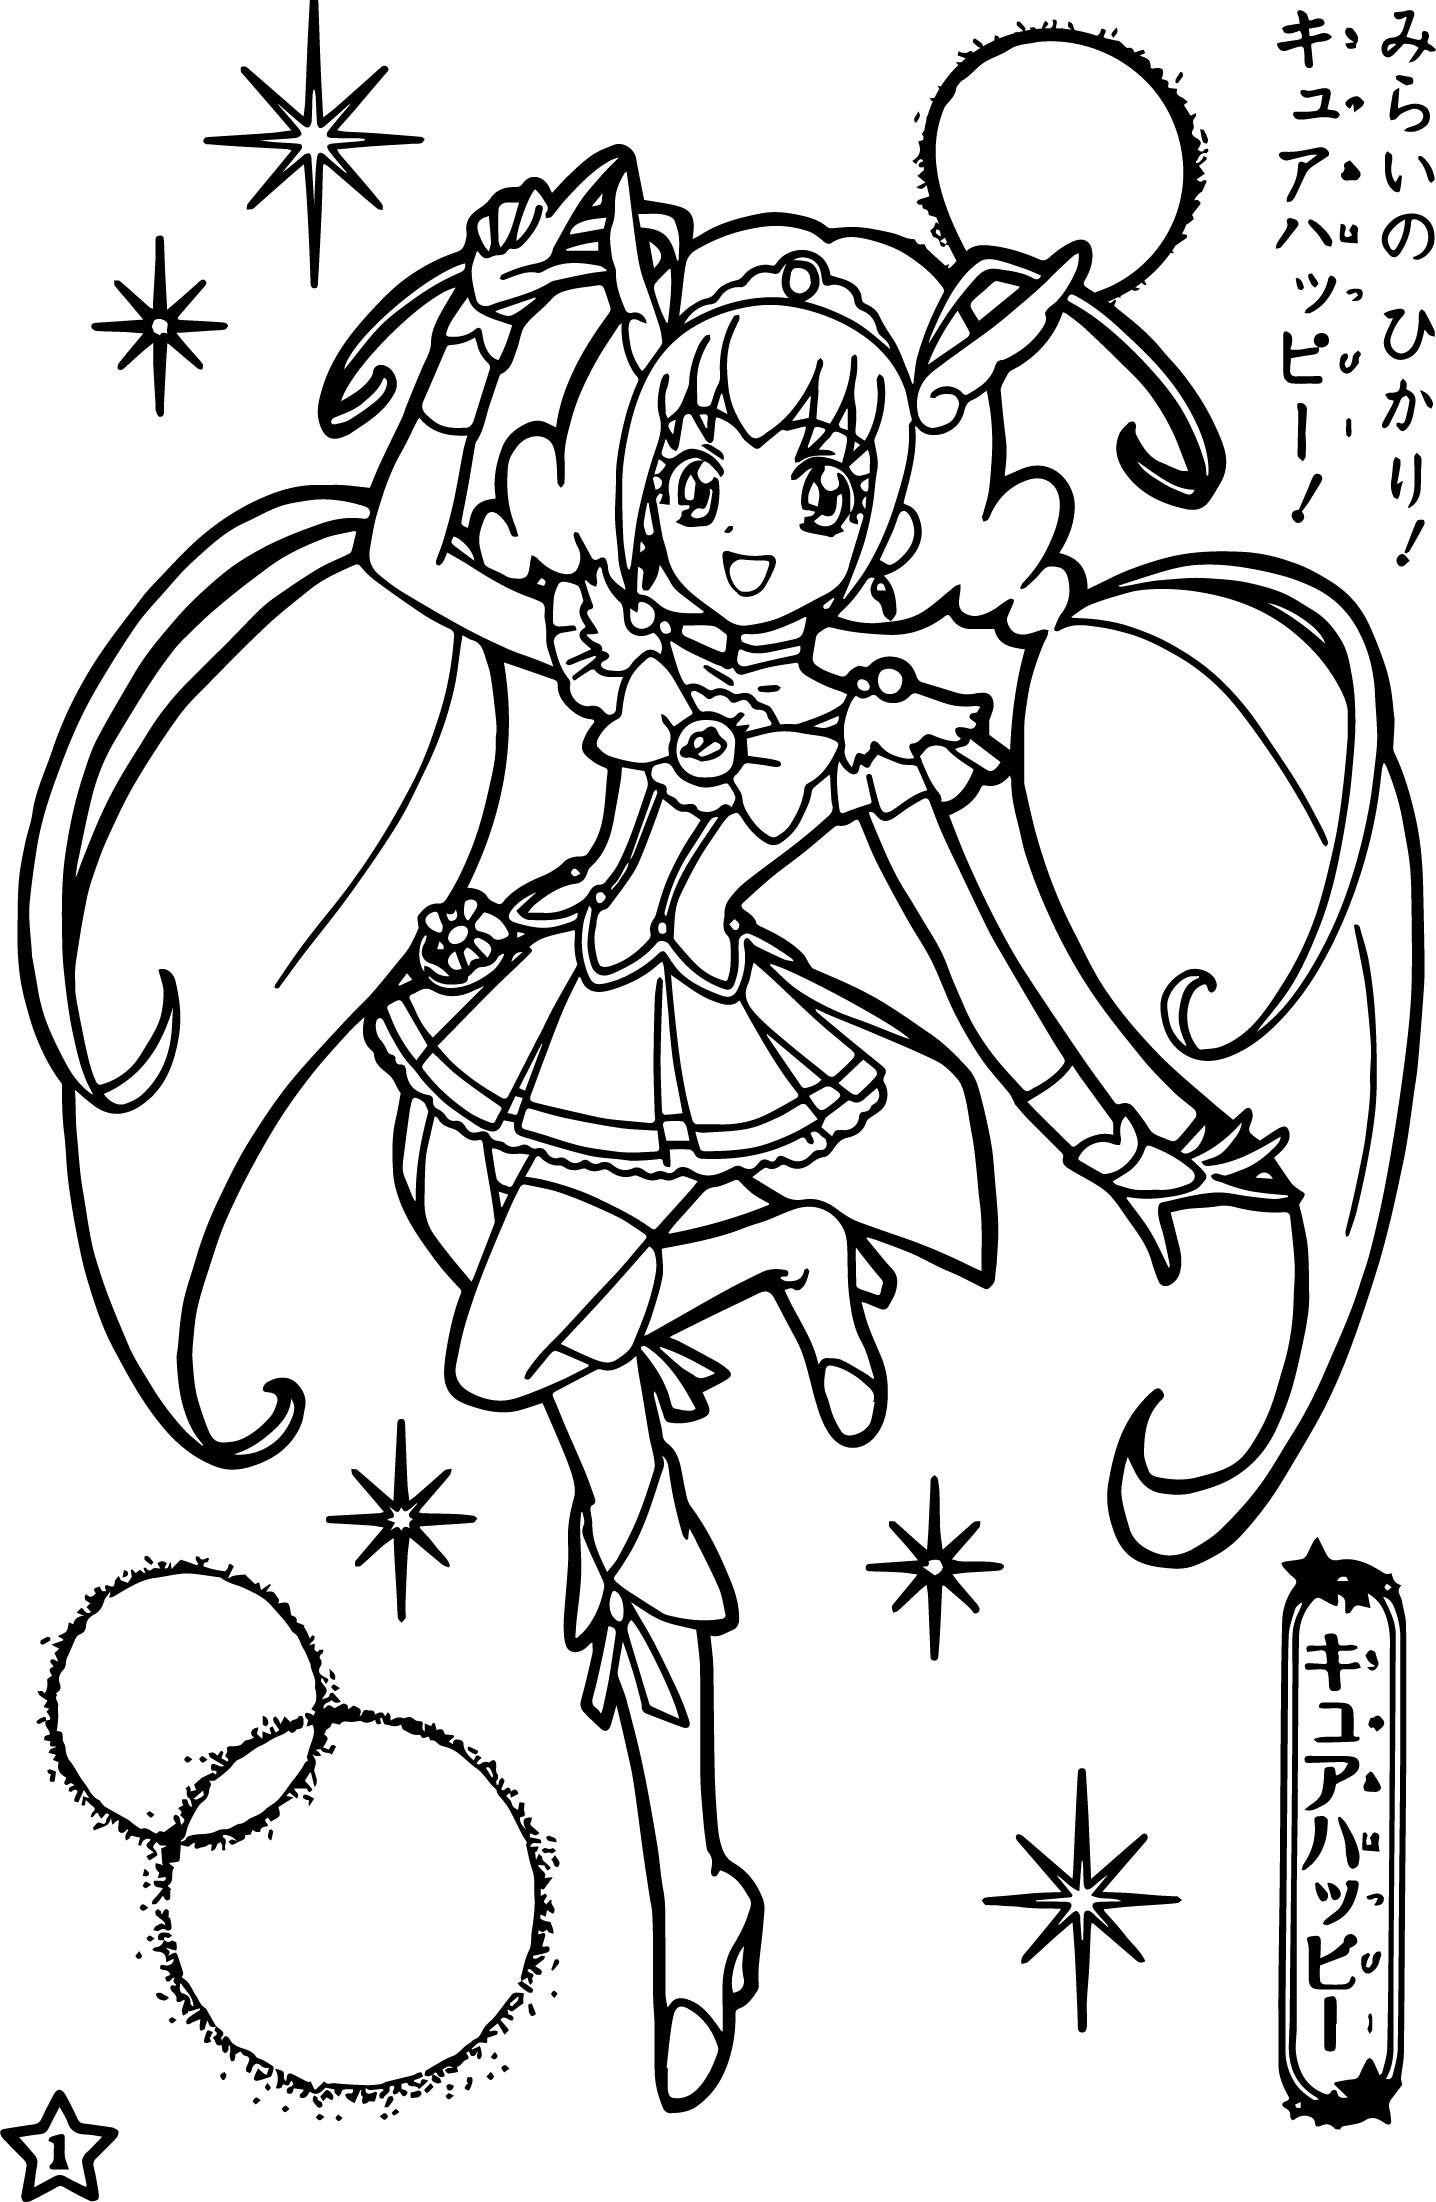 Glitter Force Coloring Pages Printable
 Glitter force Coloring Pages to Print